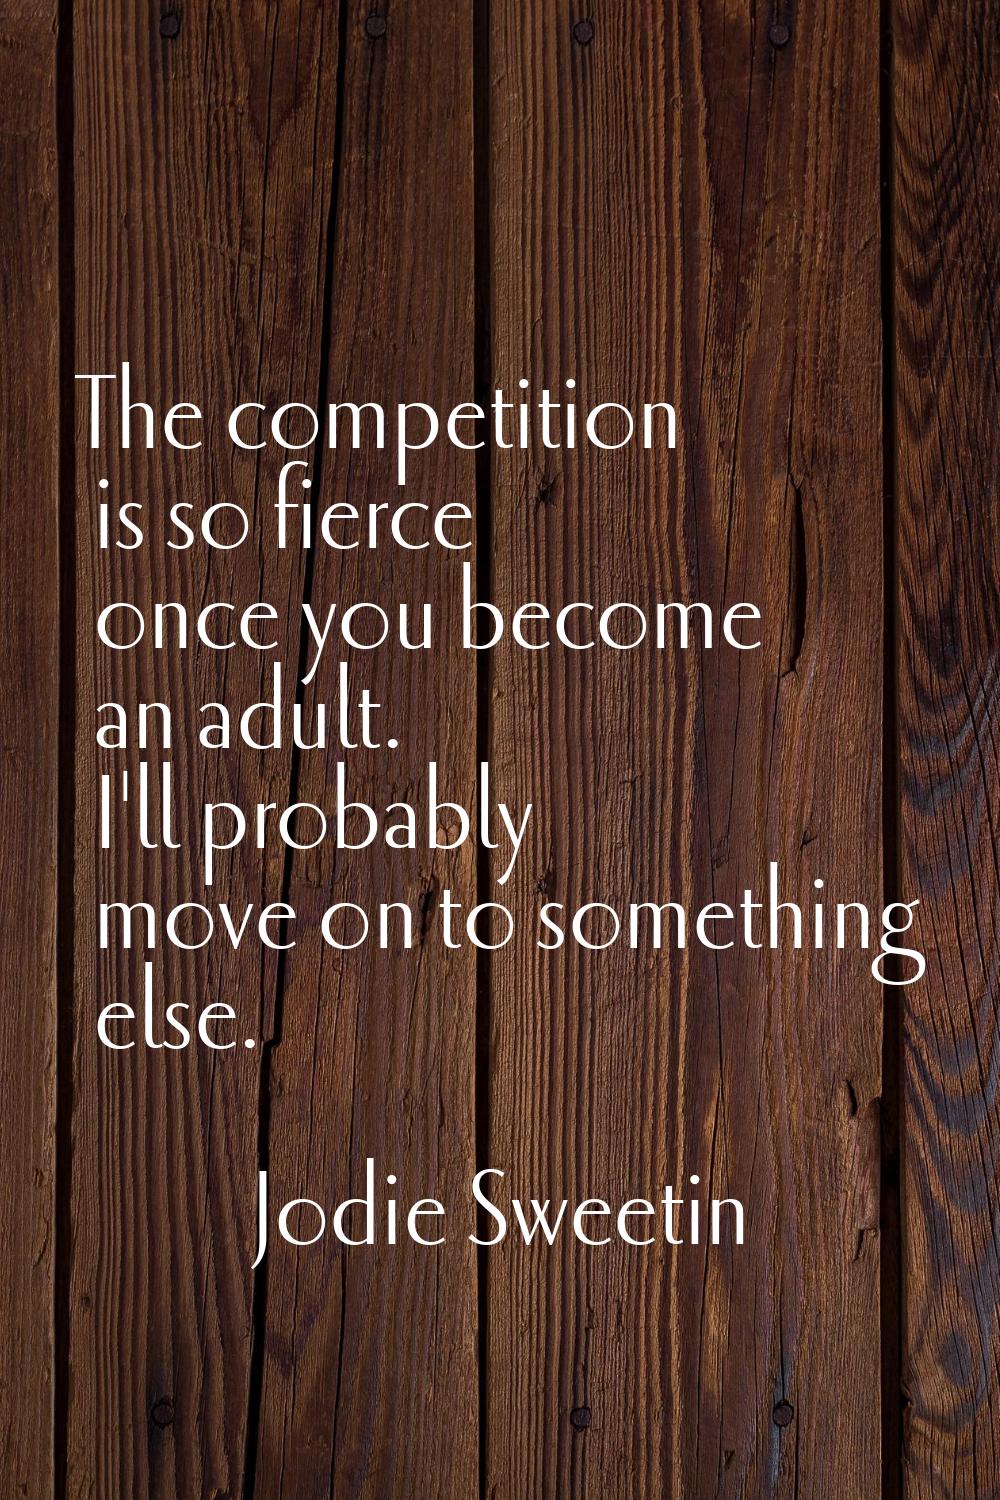 The competition is so fierce once you become an adult. I'll probably move on to something else.